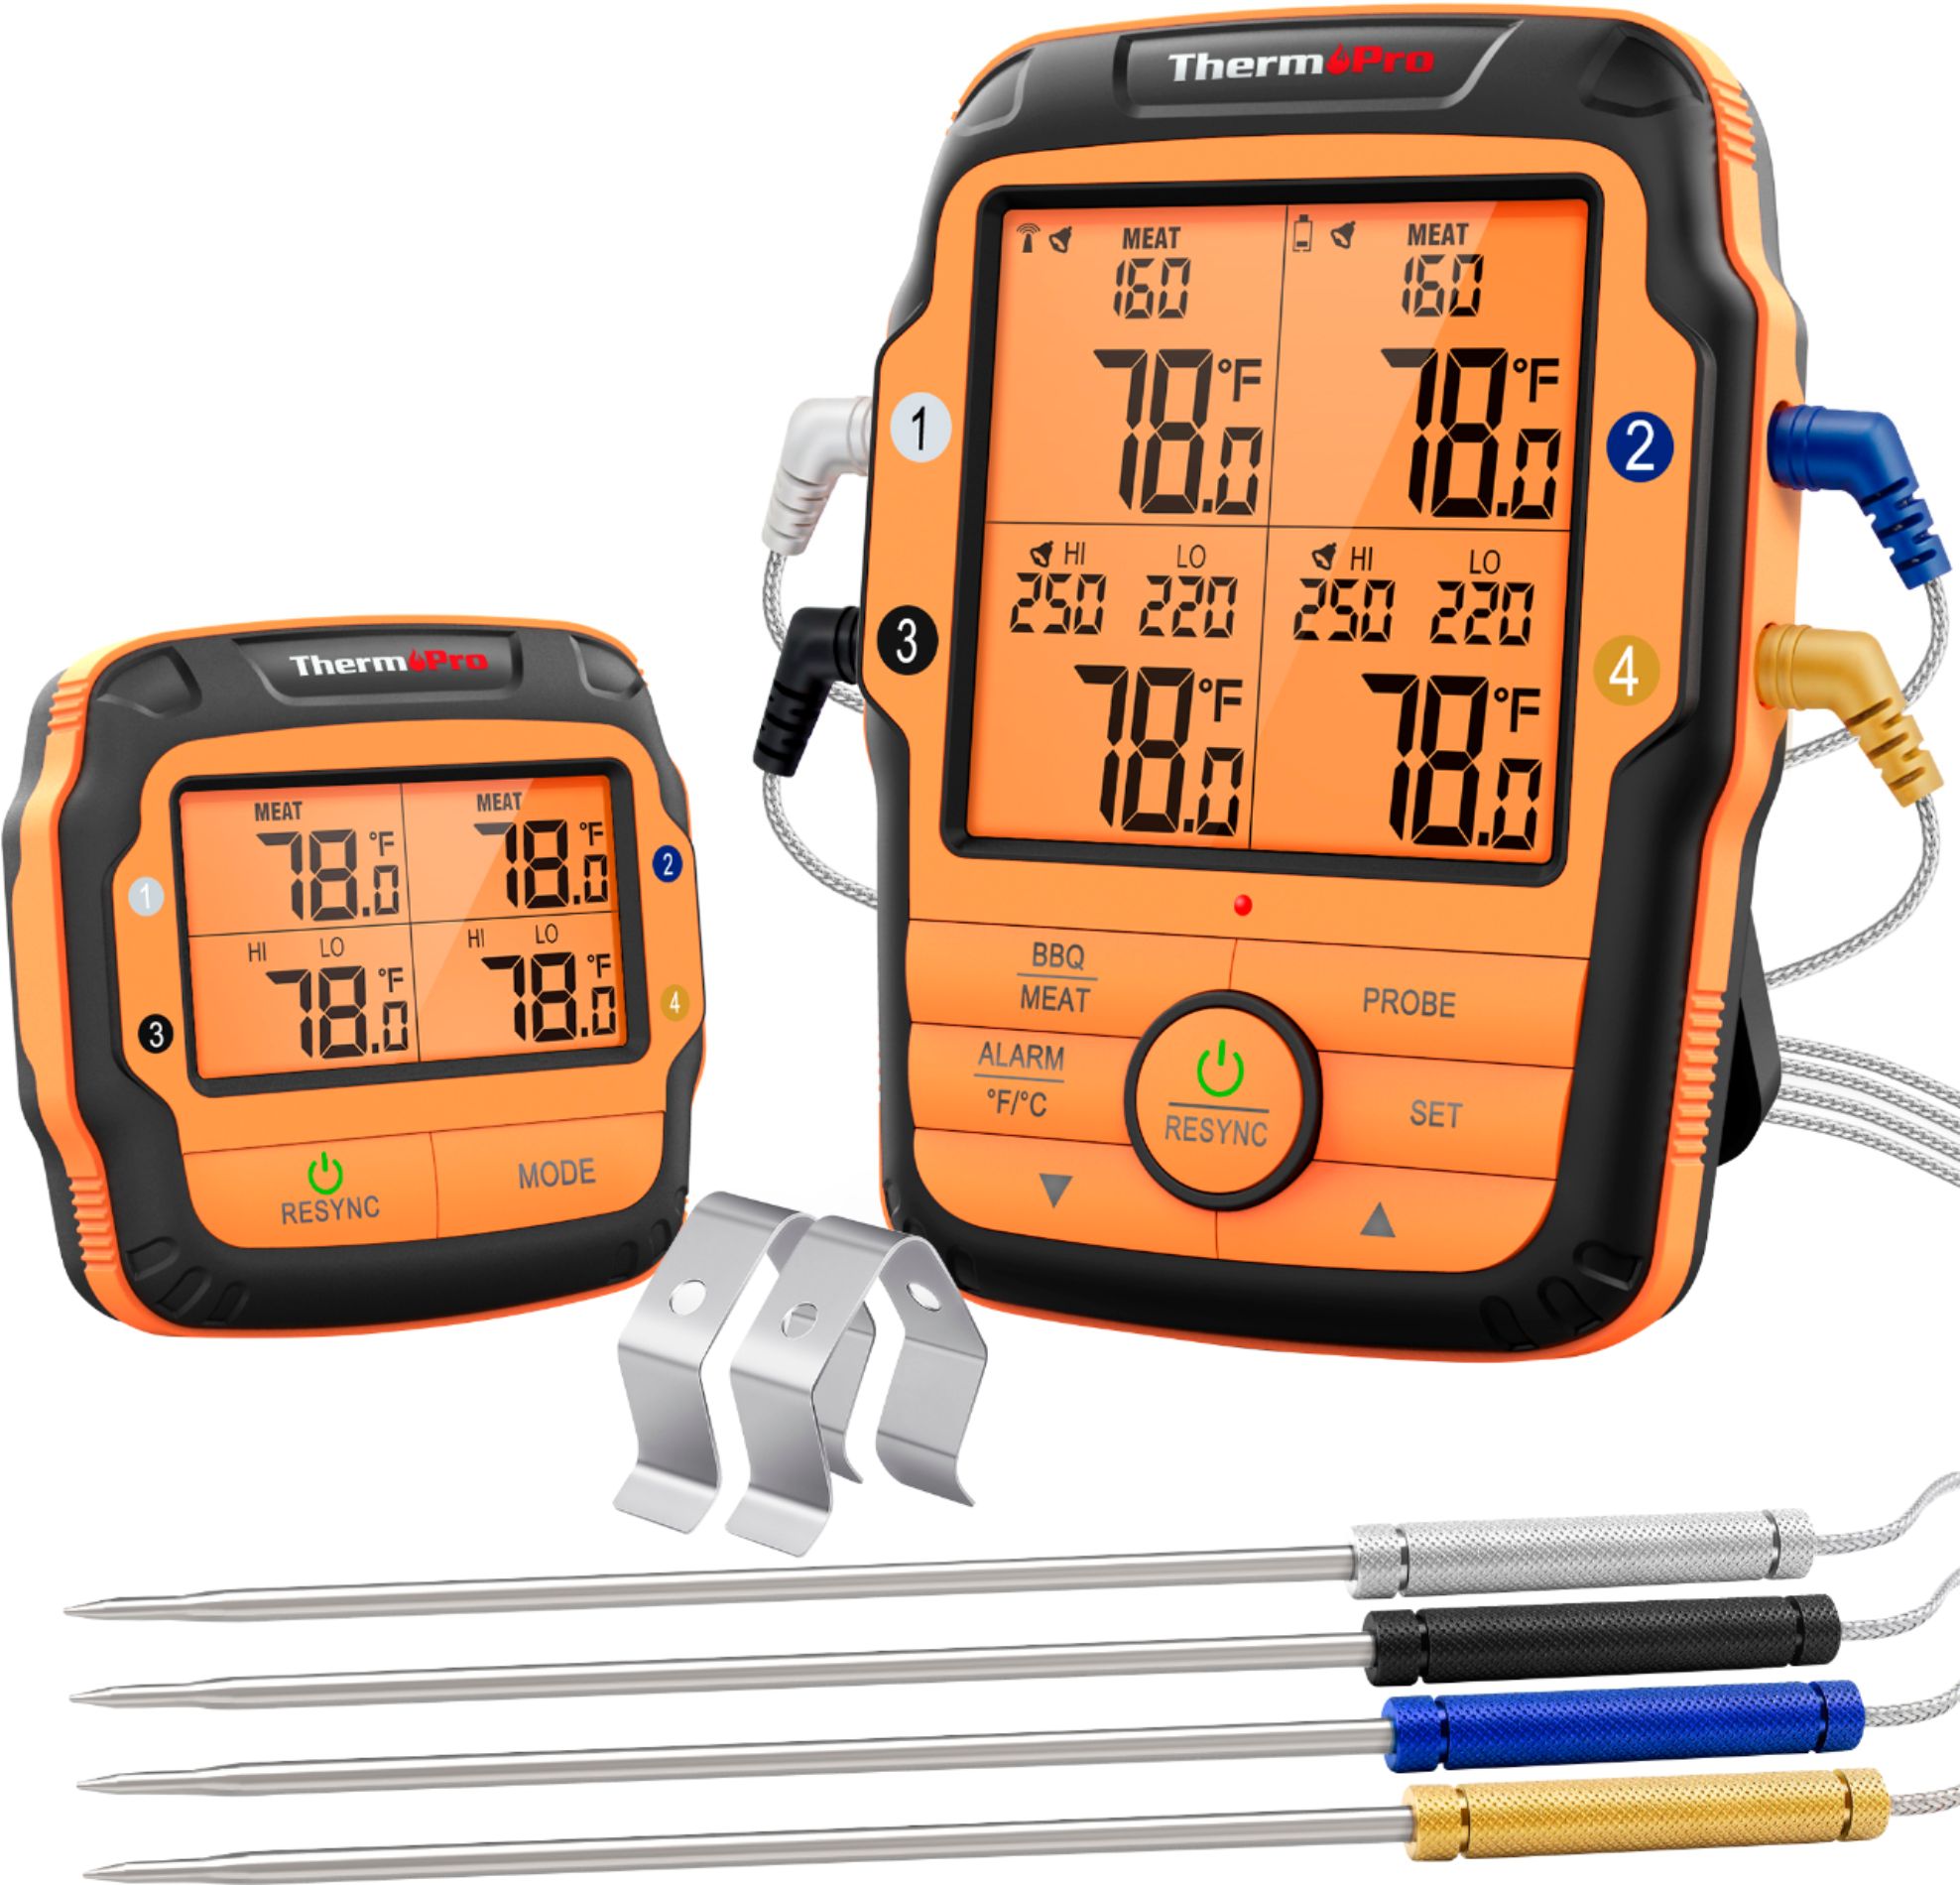 Angle View: ThermoPro - Long Range Wireless Meat Thermometer with 4 Probes - ORANGE